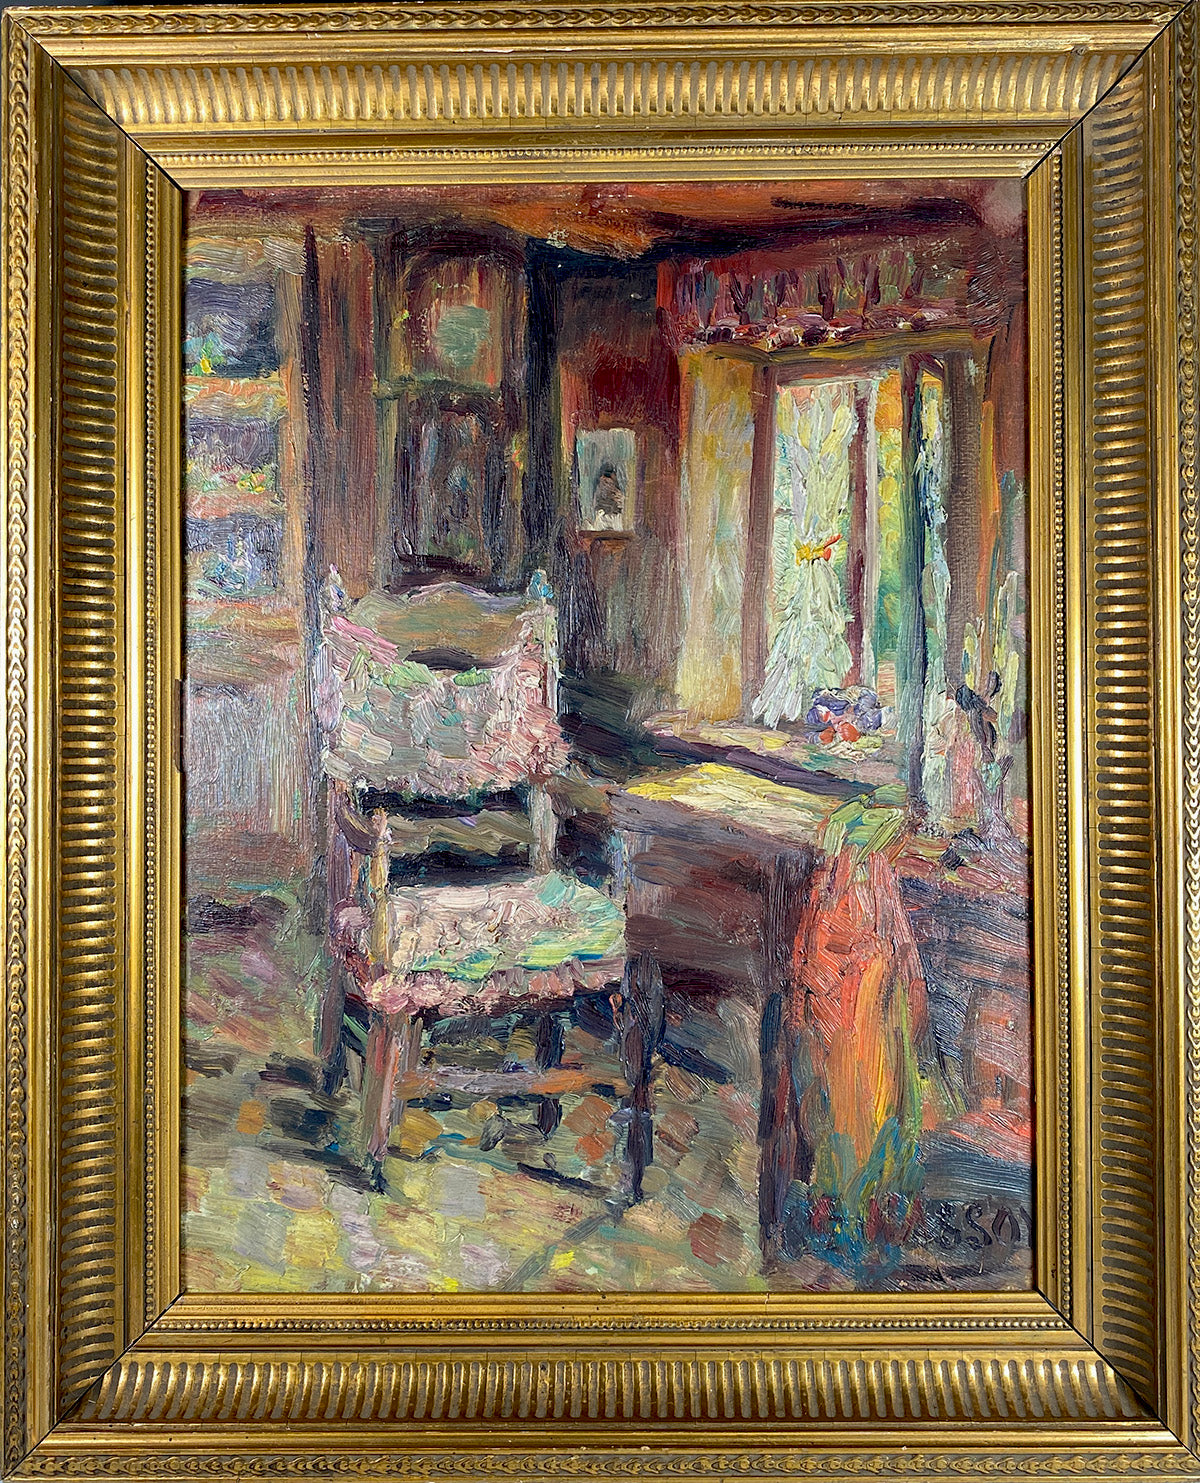 Antique French Oil Painting, Impressionist Interior c. 1880-1900, Signed, Nicely Framed